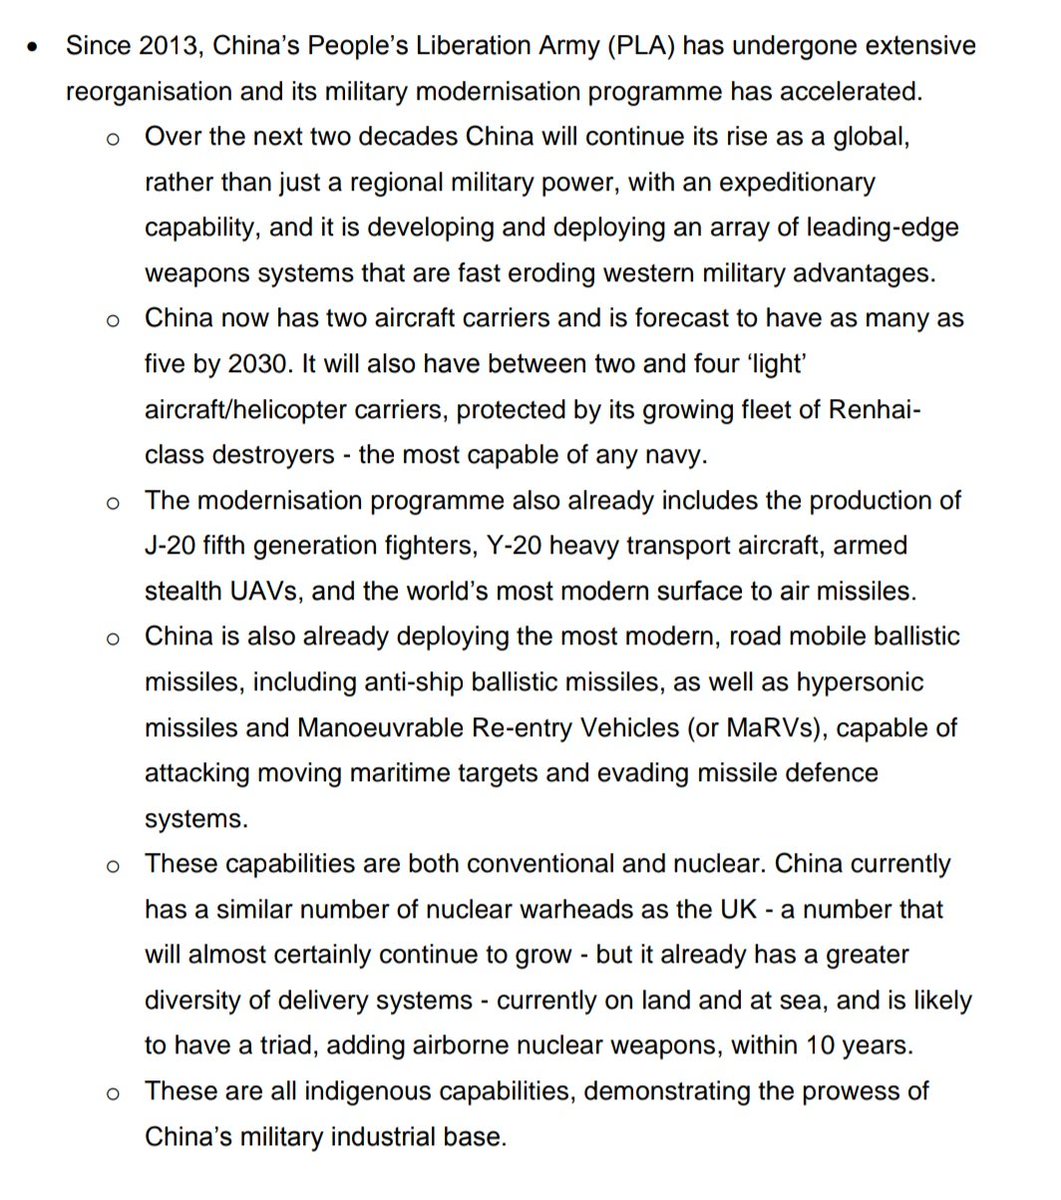 UK chief of defence intelligence: China "is developing and deploying an array of leading-edge weapons systems that are fast eroding western military advantages". Says Renhai-class destroyer is "the most capable of any navy", and China will have a nuclear triad "within ten years"